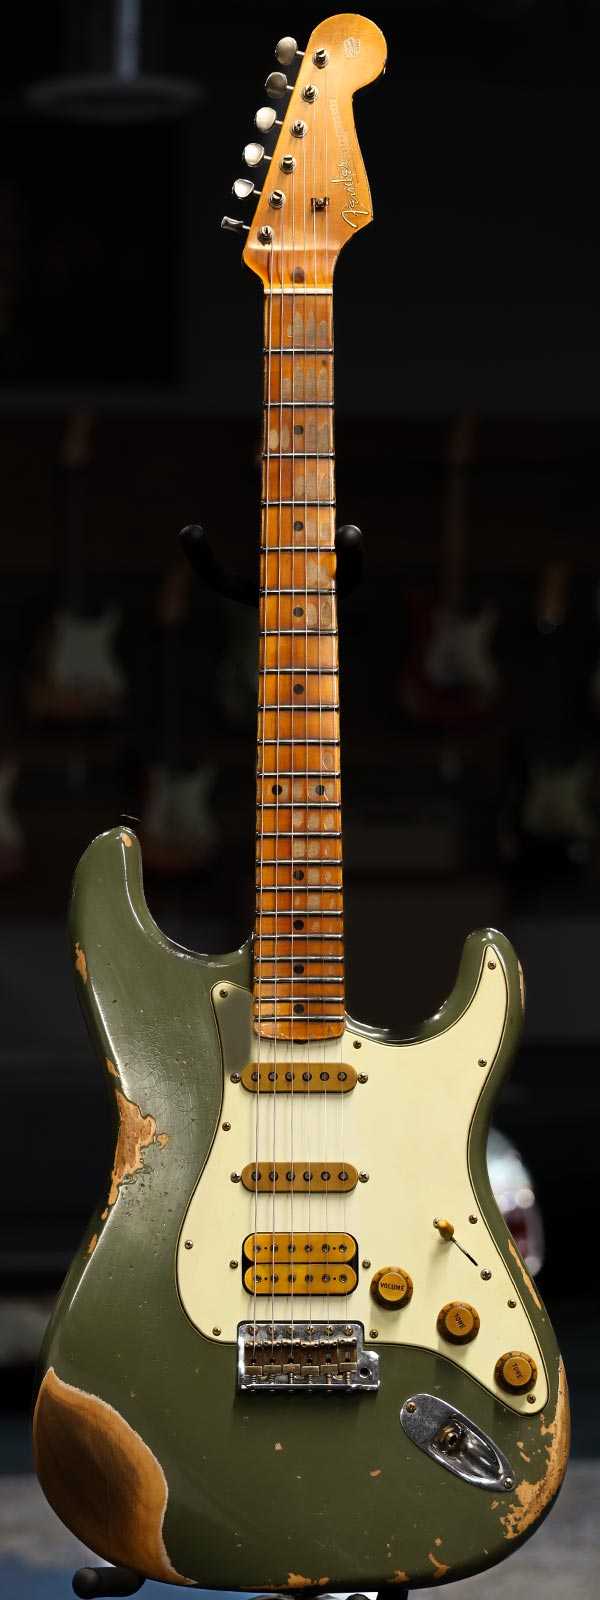 WildCat Exclusive Fender Custom Shop Alley Cat Strat Floyd Rose Maple Neck and Board Drab Green